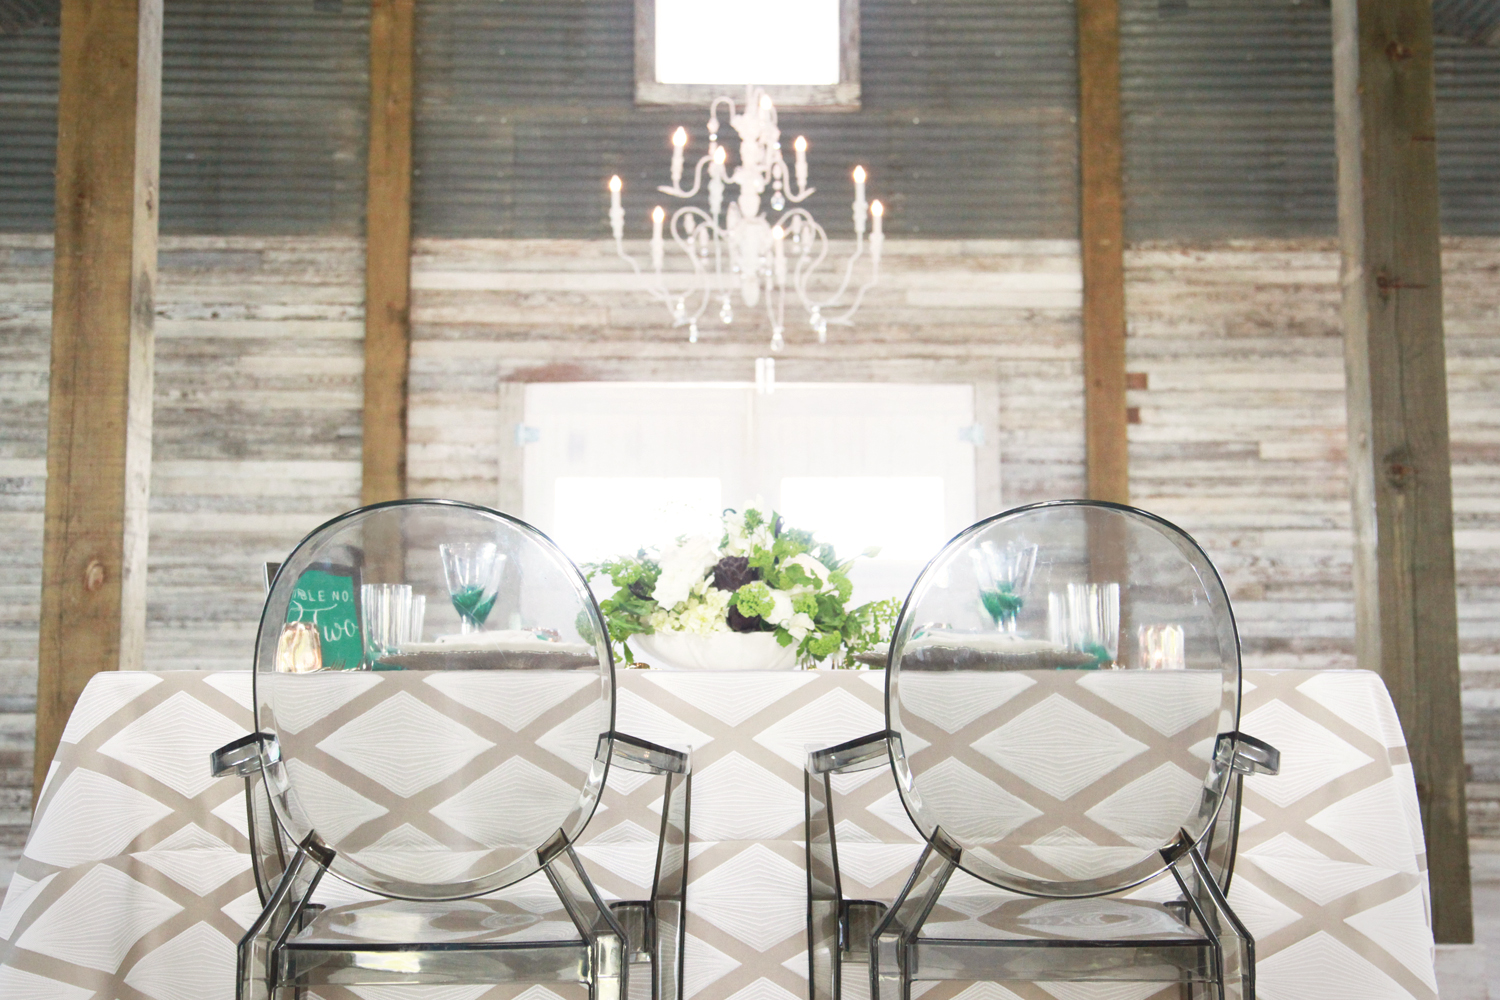 ISWD Destination Event Planners: Green Glam Event